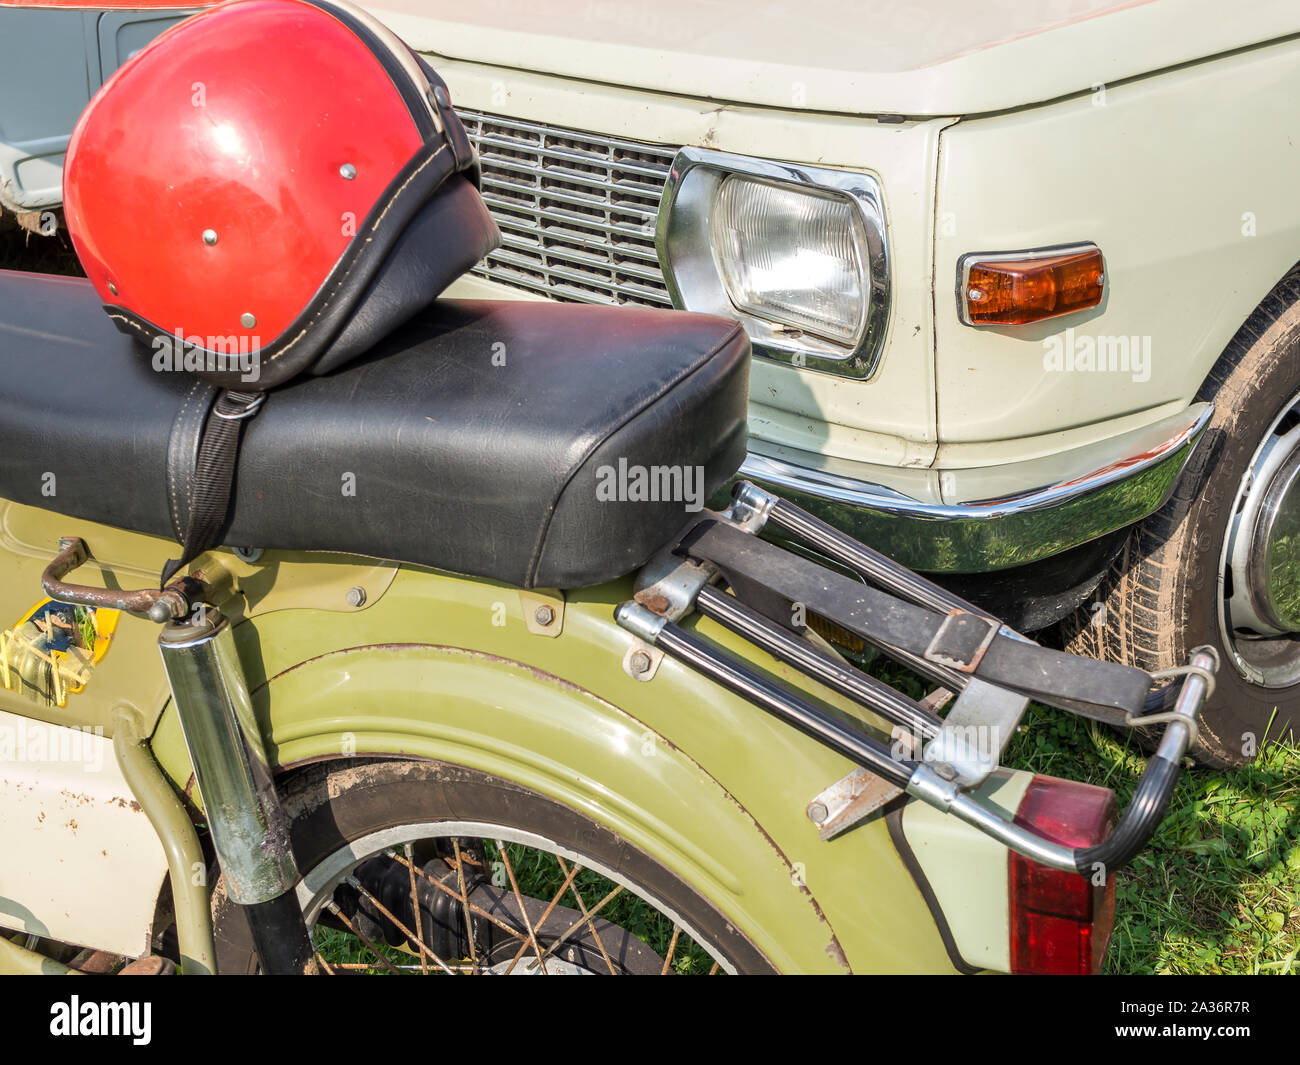 DDR vintage car moped and car Stock Photo